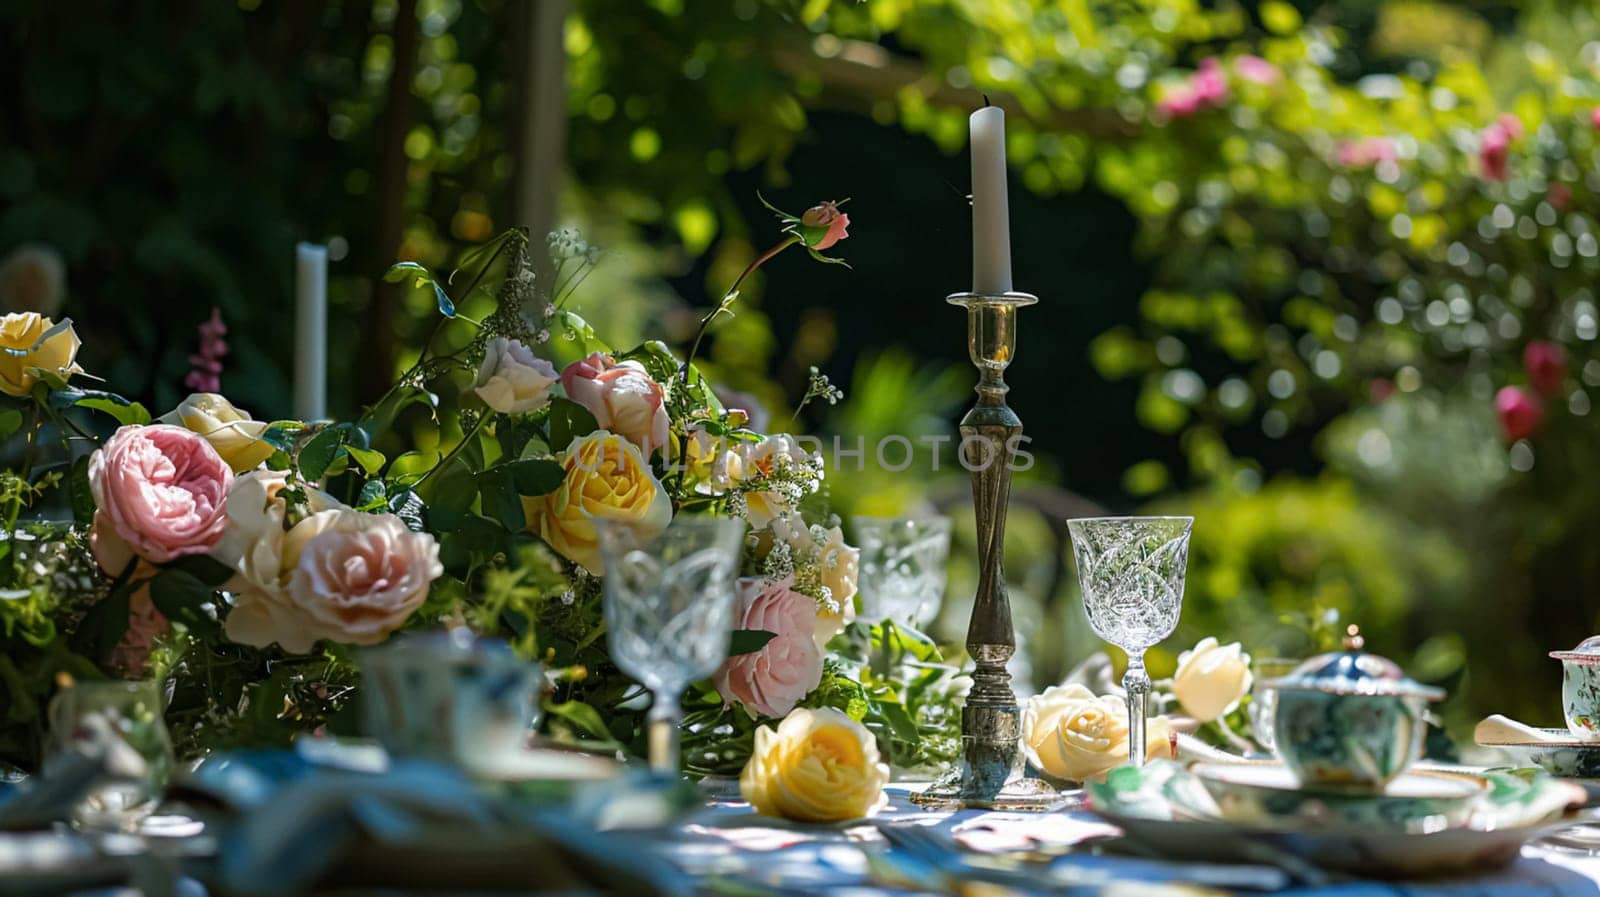 Table setting with rose flowers and candles for an event party or wedding reception in summer garden. by Olayola